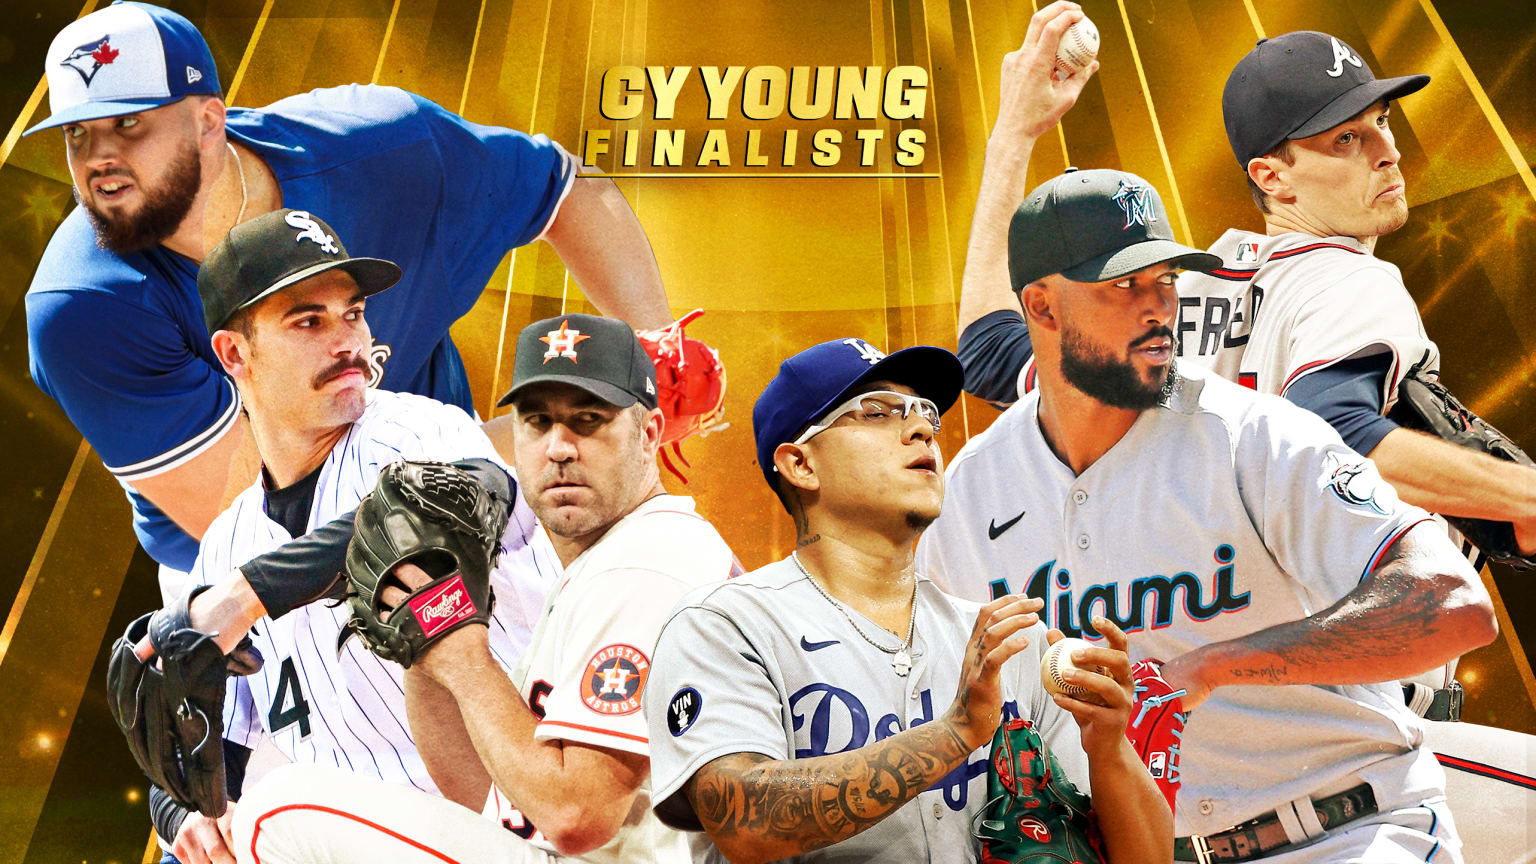 6 Cy Young Award finalists arranged over a gold background